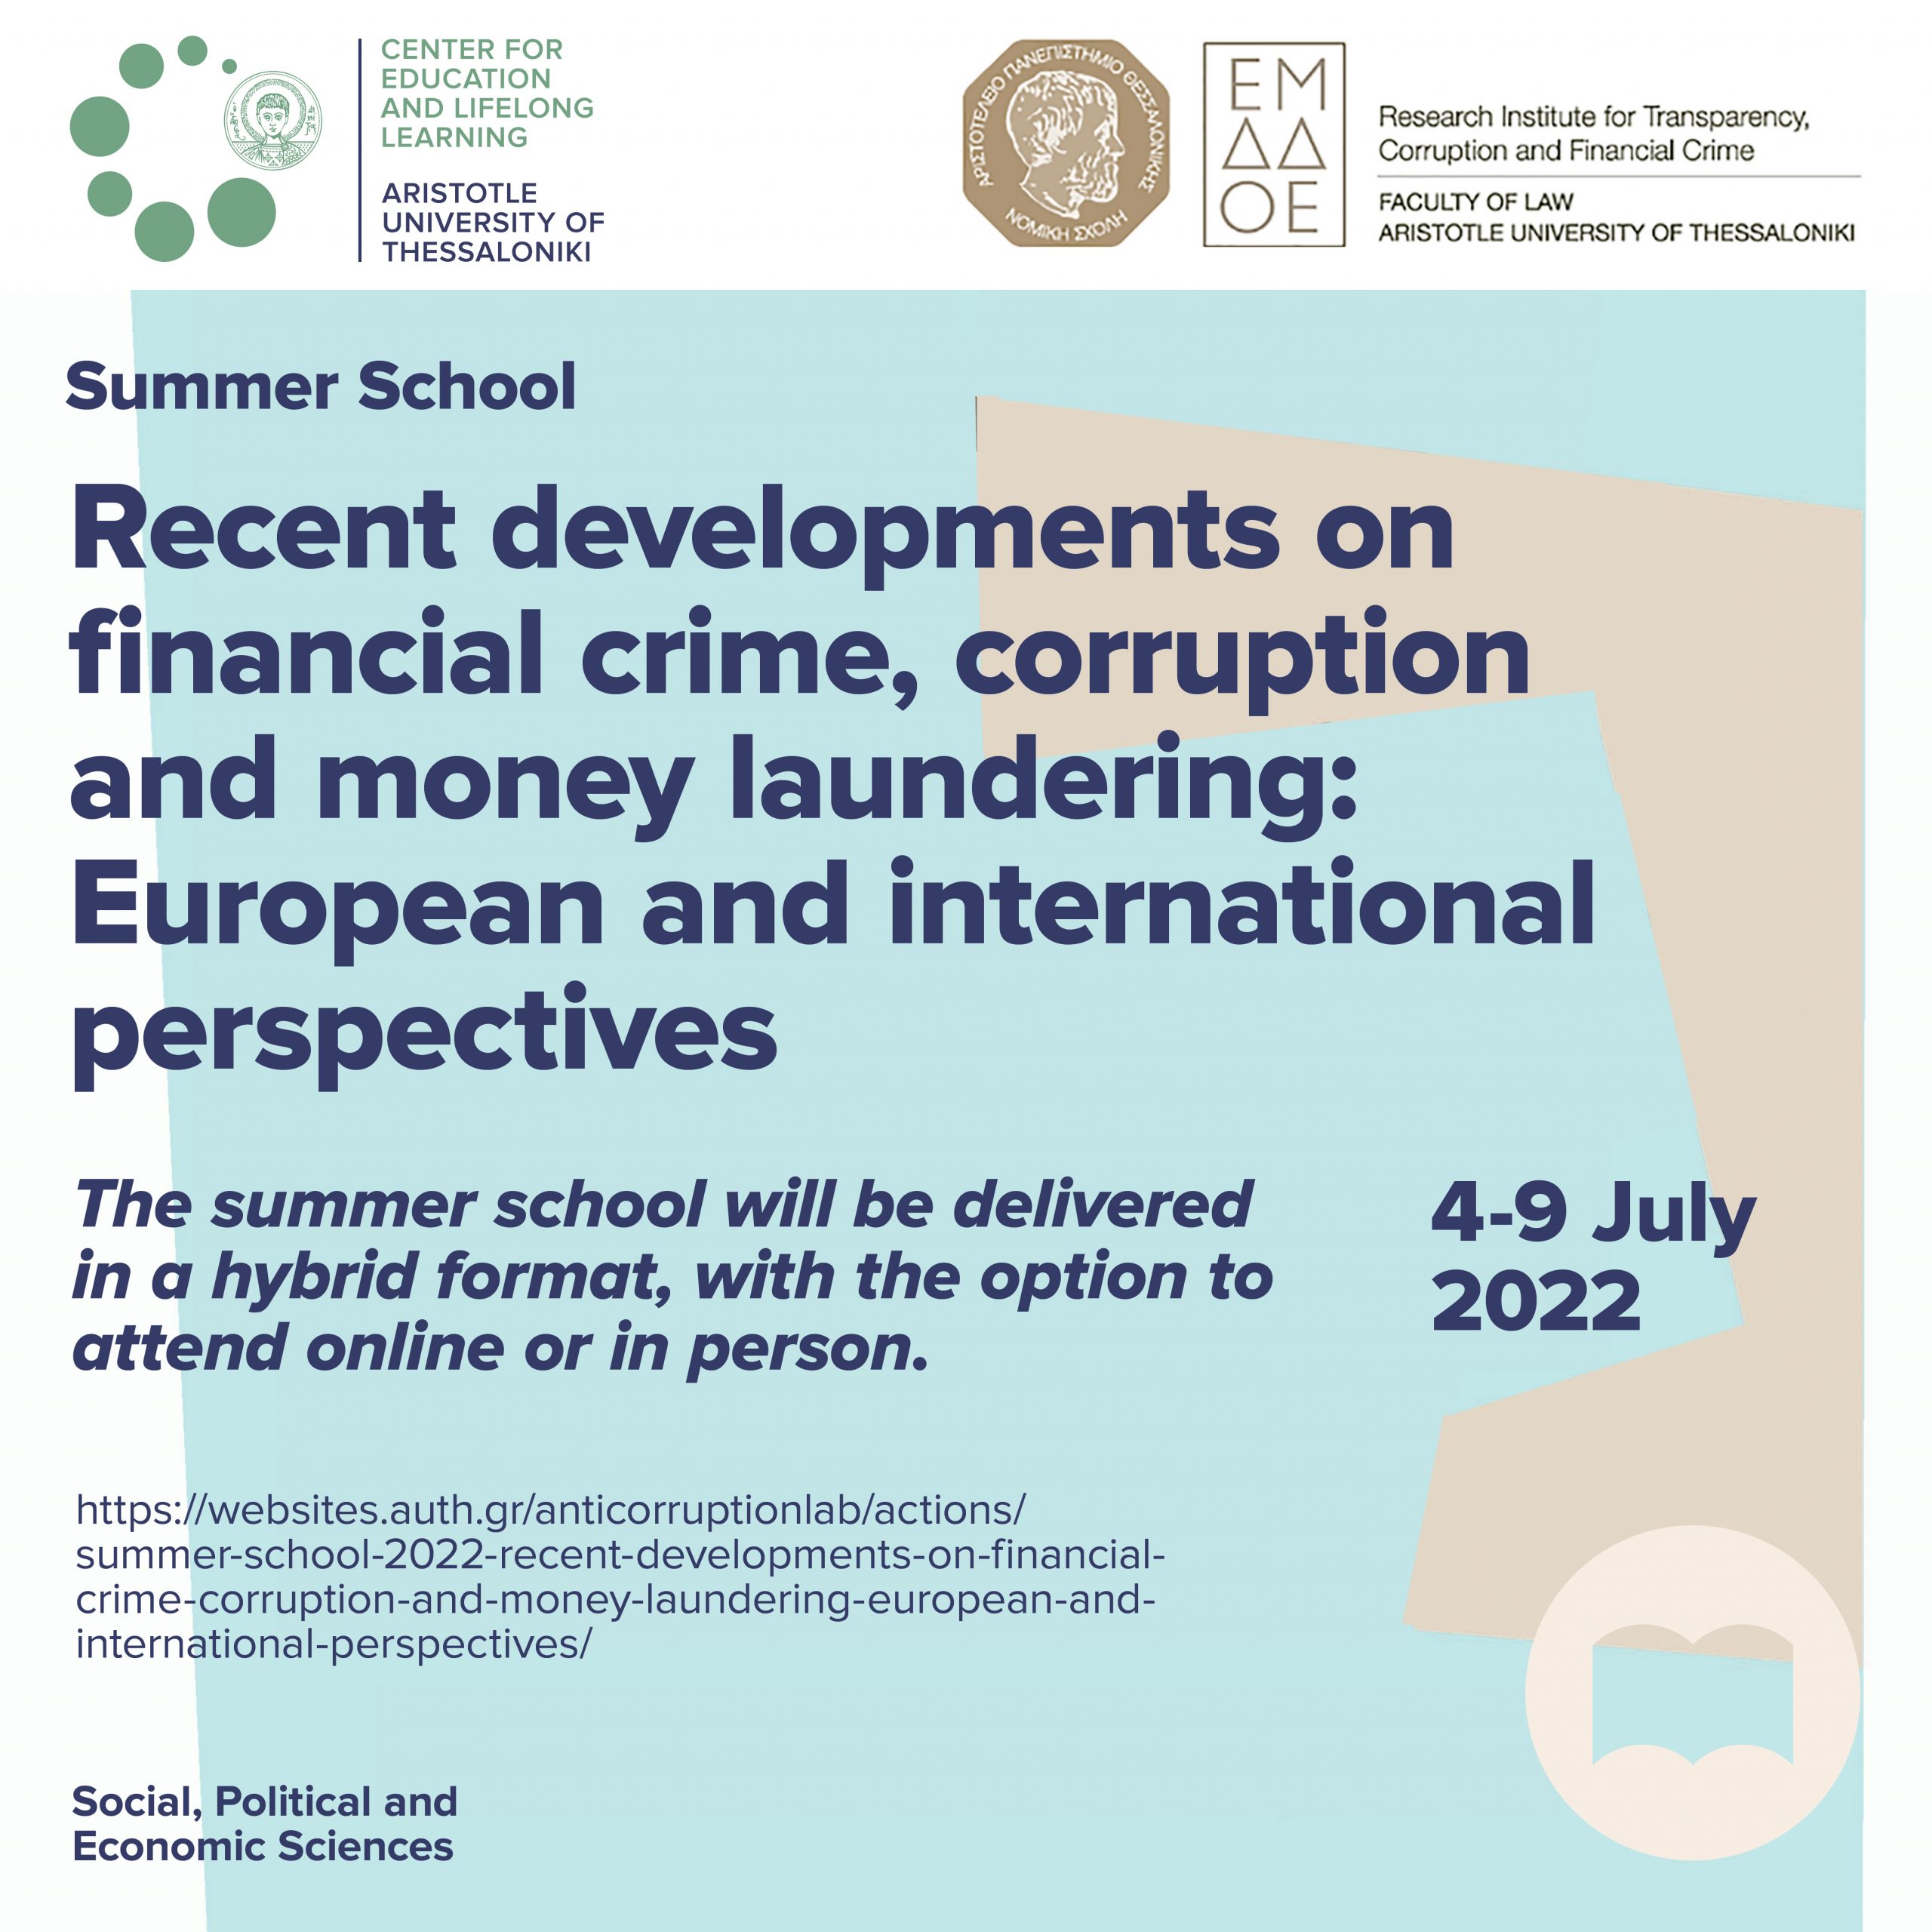 Summer school “Recent developments on financial crime, corruption and money laundering: European and international perspectives”